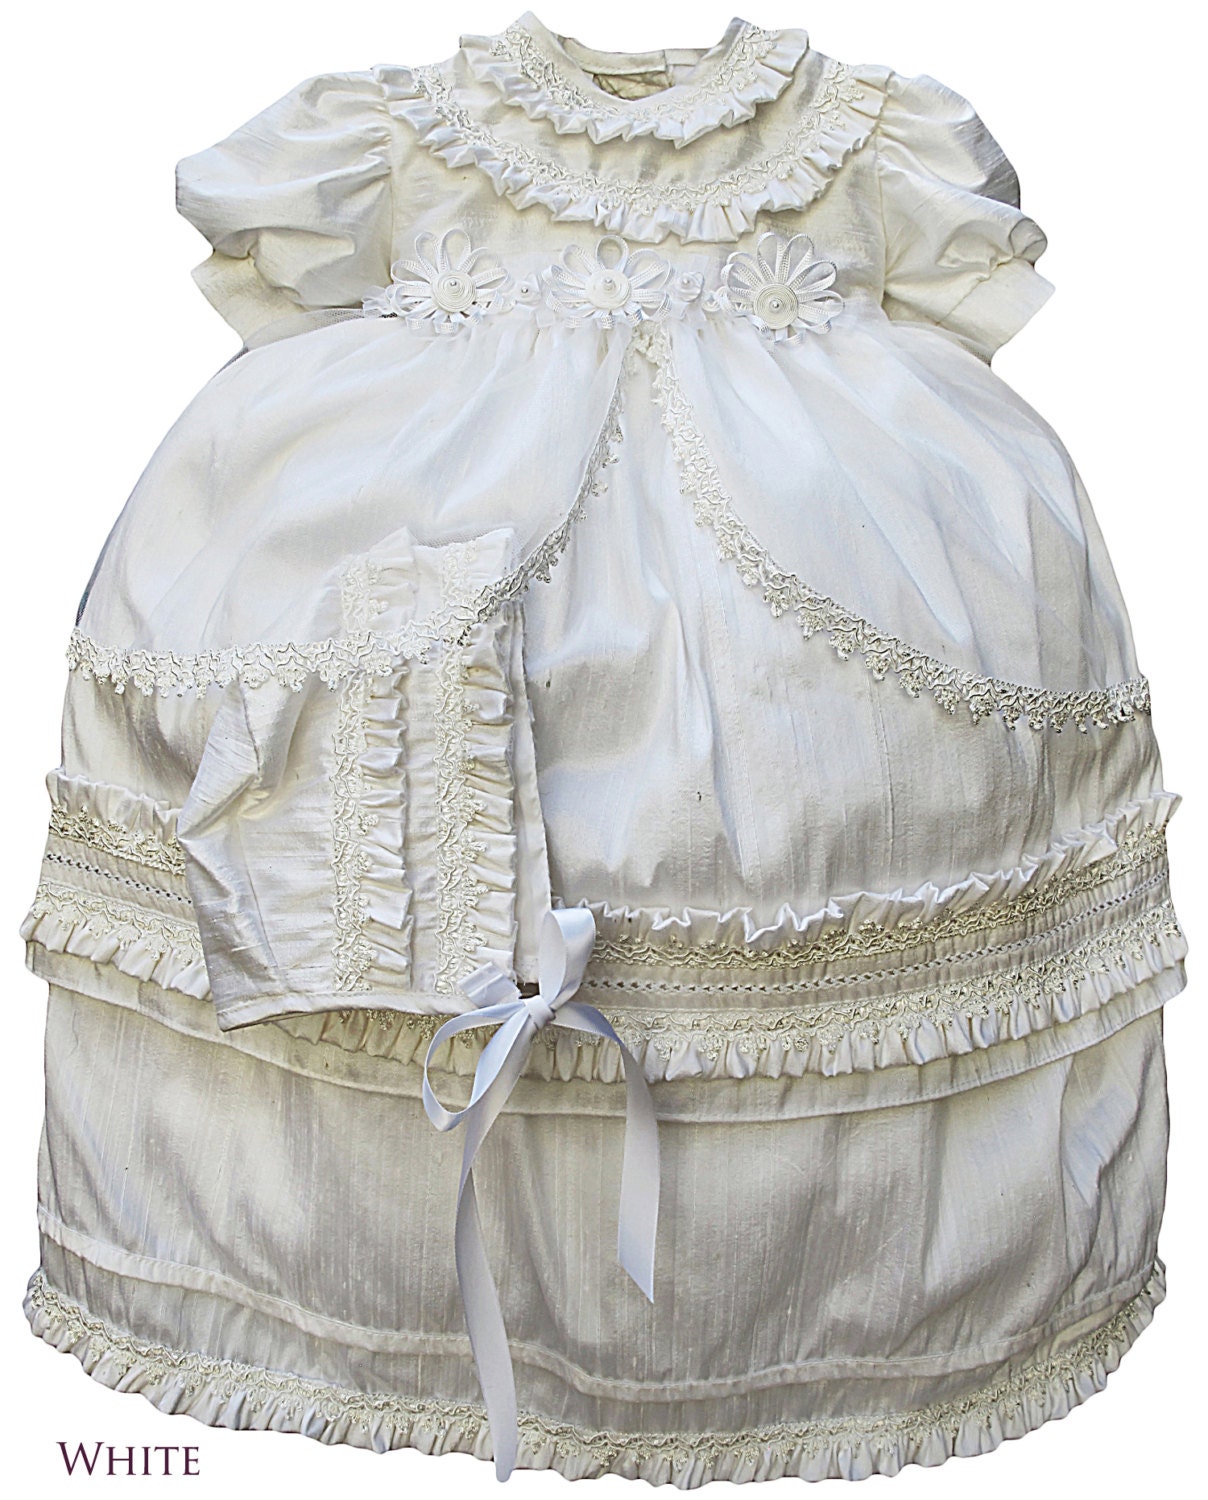 Neoclassical baby girl dress. Christening or baptism by Burbvus